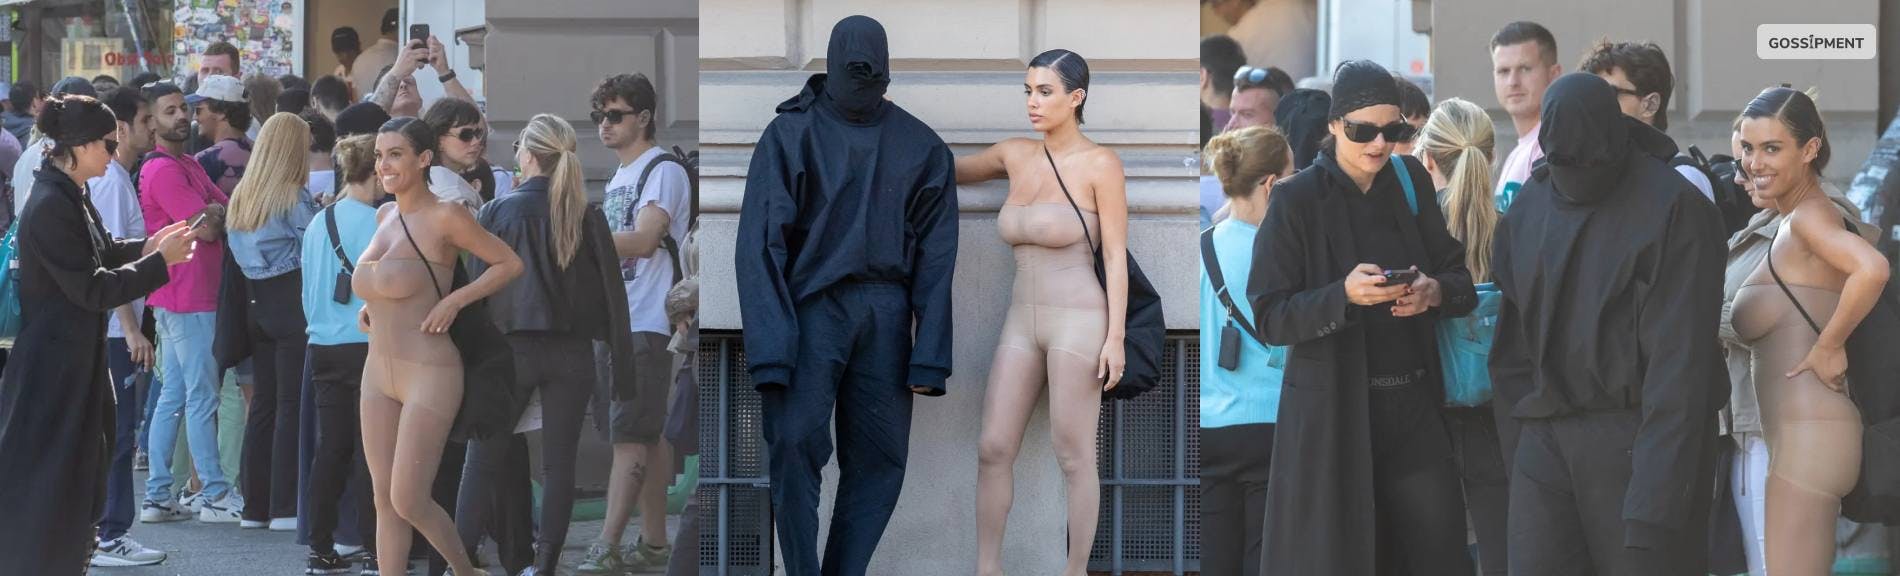 Cover Image for Bianca Censori Visits Germany In Her Tights-Only Style With ‘husband’ Kanye West